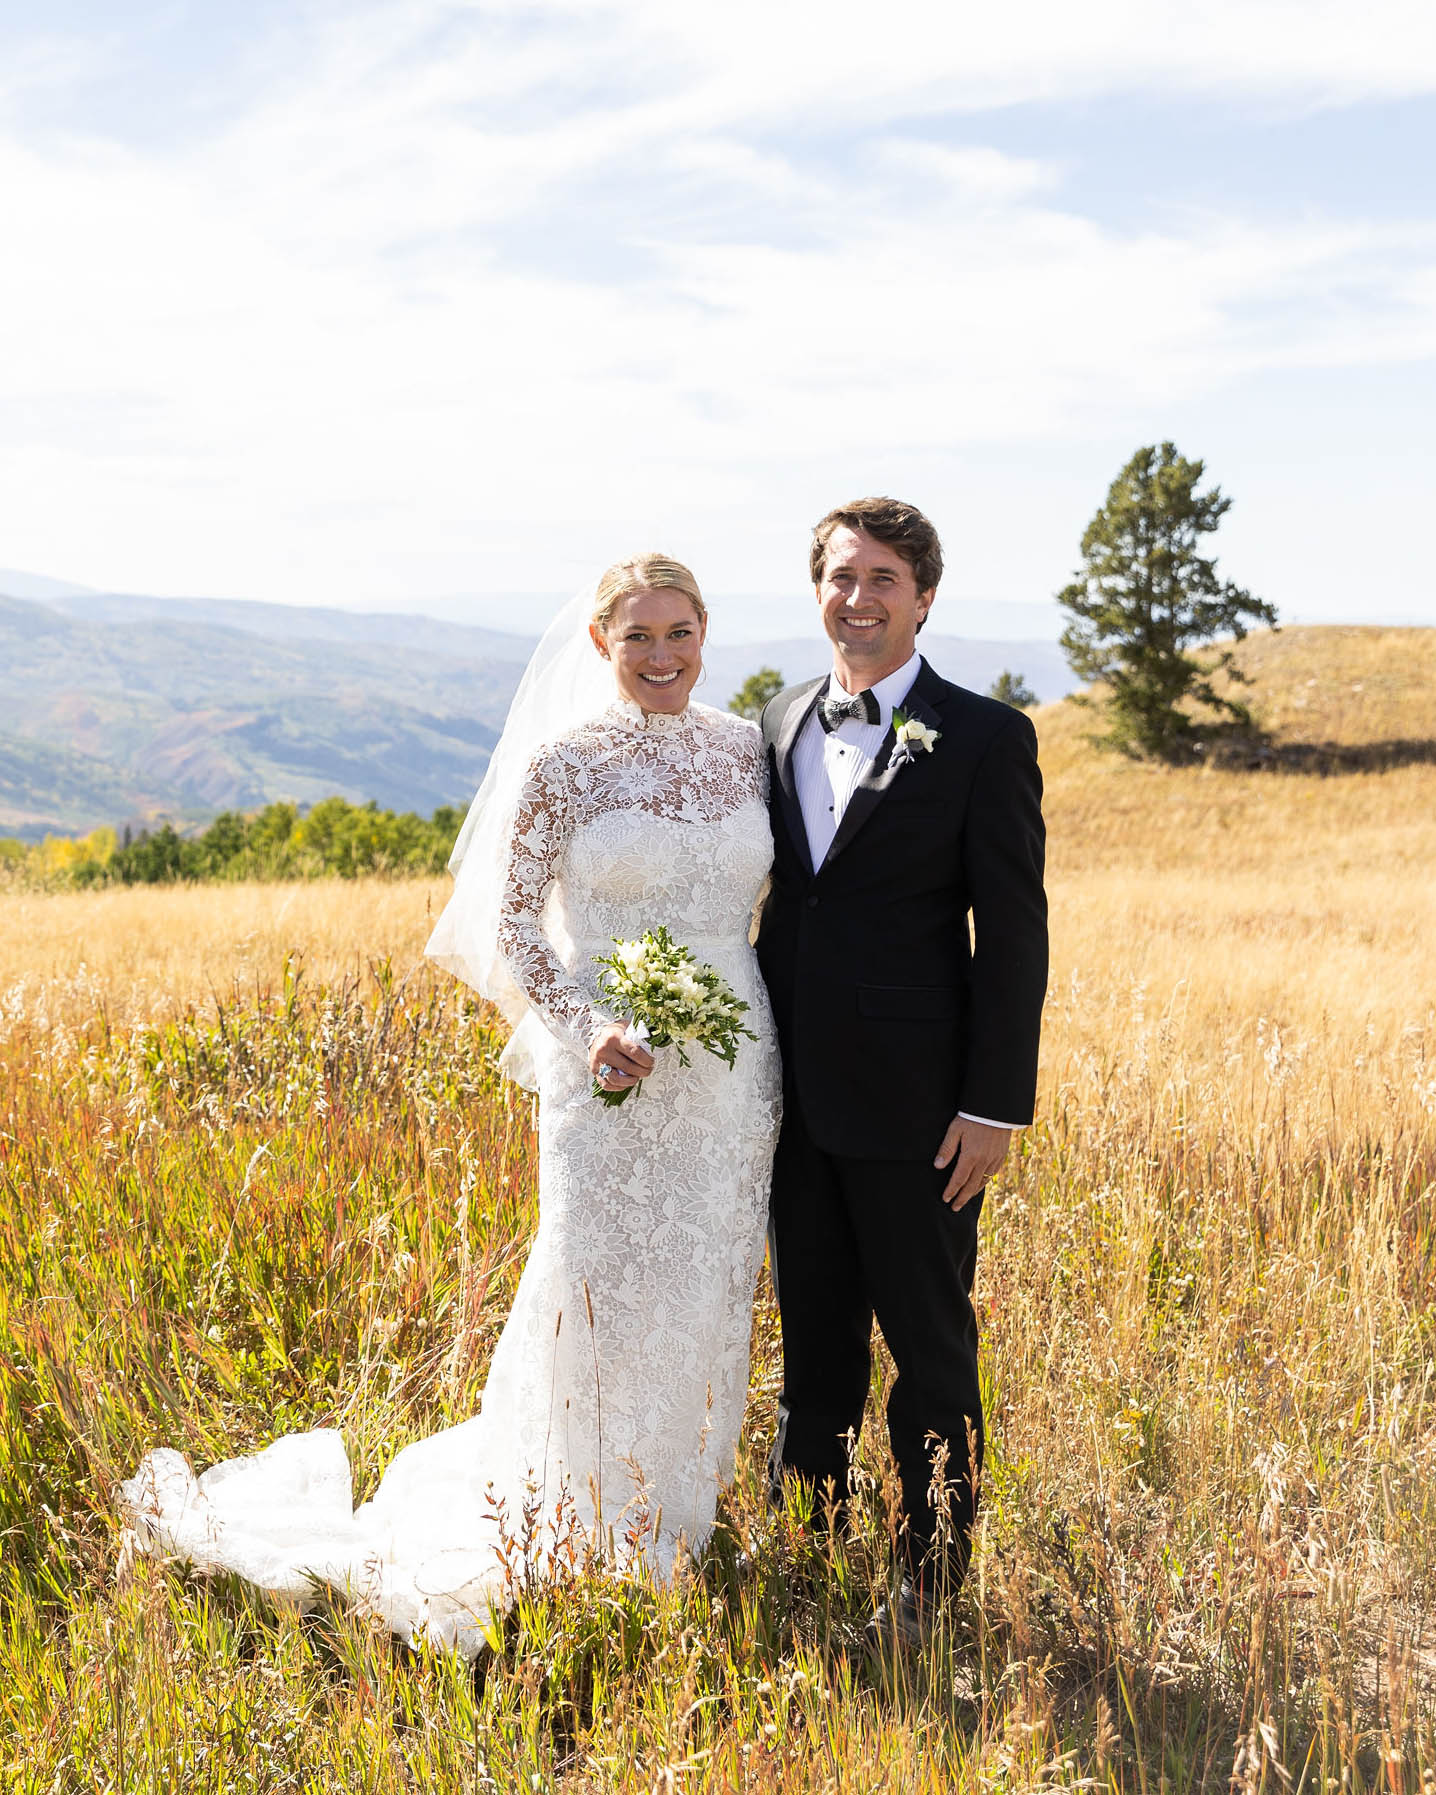 A Ceremony Overlooking the Mountains of Colorado with Mr. & Mrs. Lapke